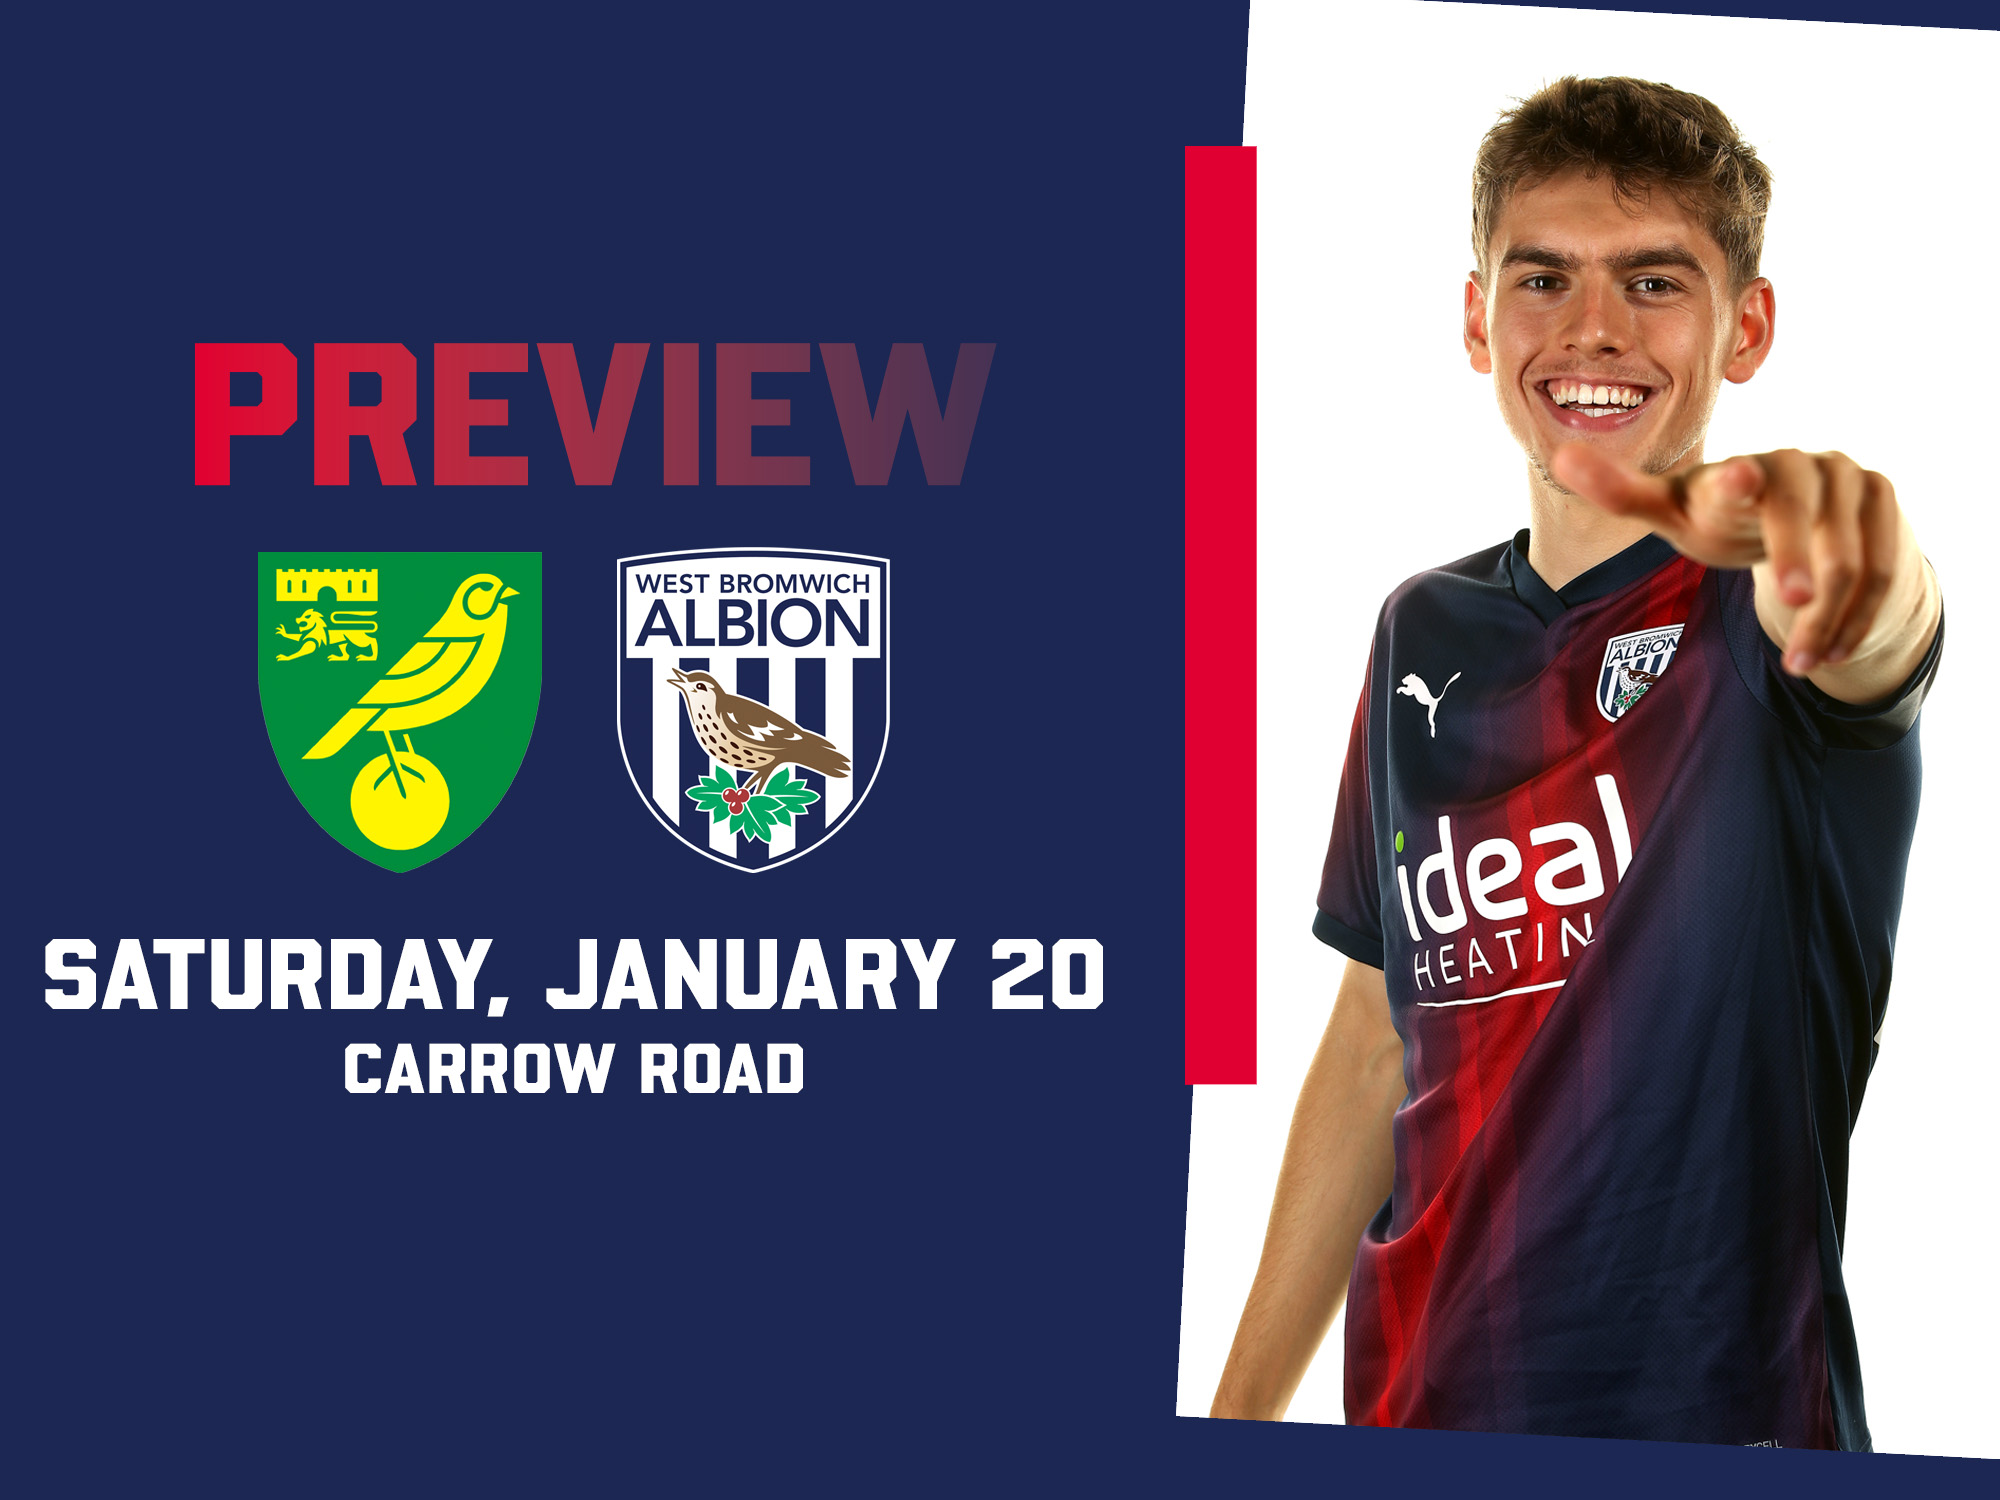 Norwich and WBA badges and an image of Tom Fellows in the navy blue and red away kit pointing at the camera on the away match preview graphic 